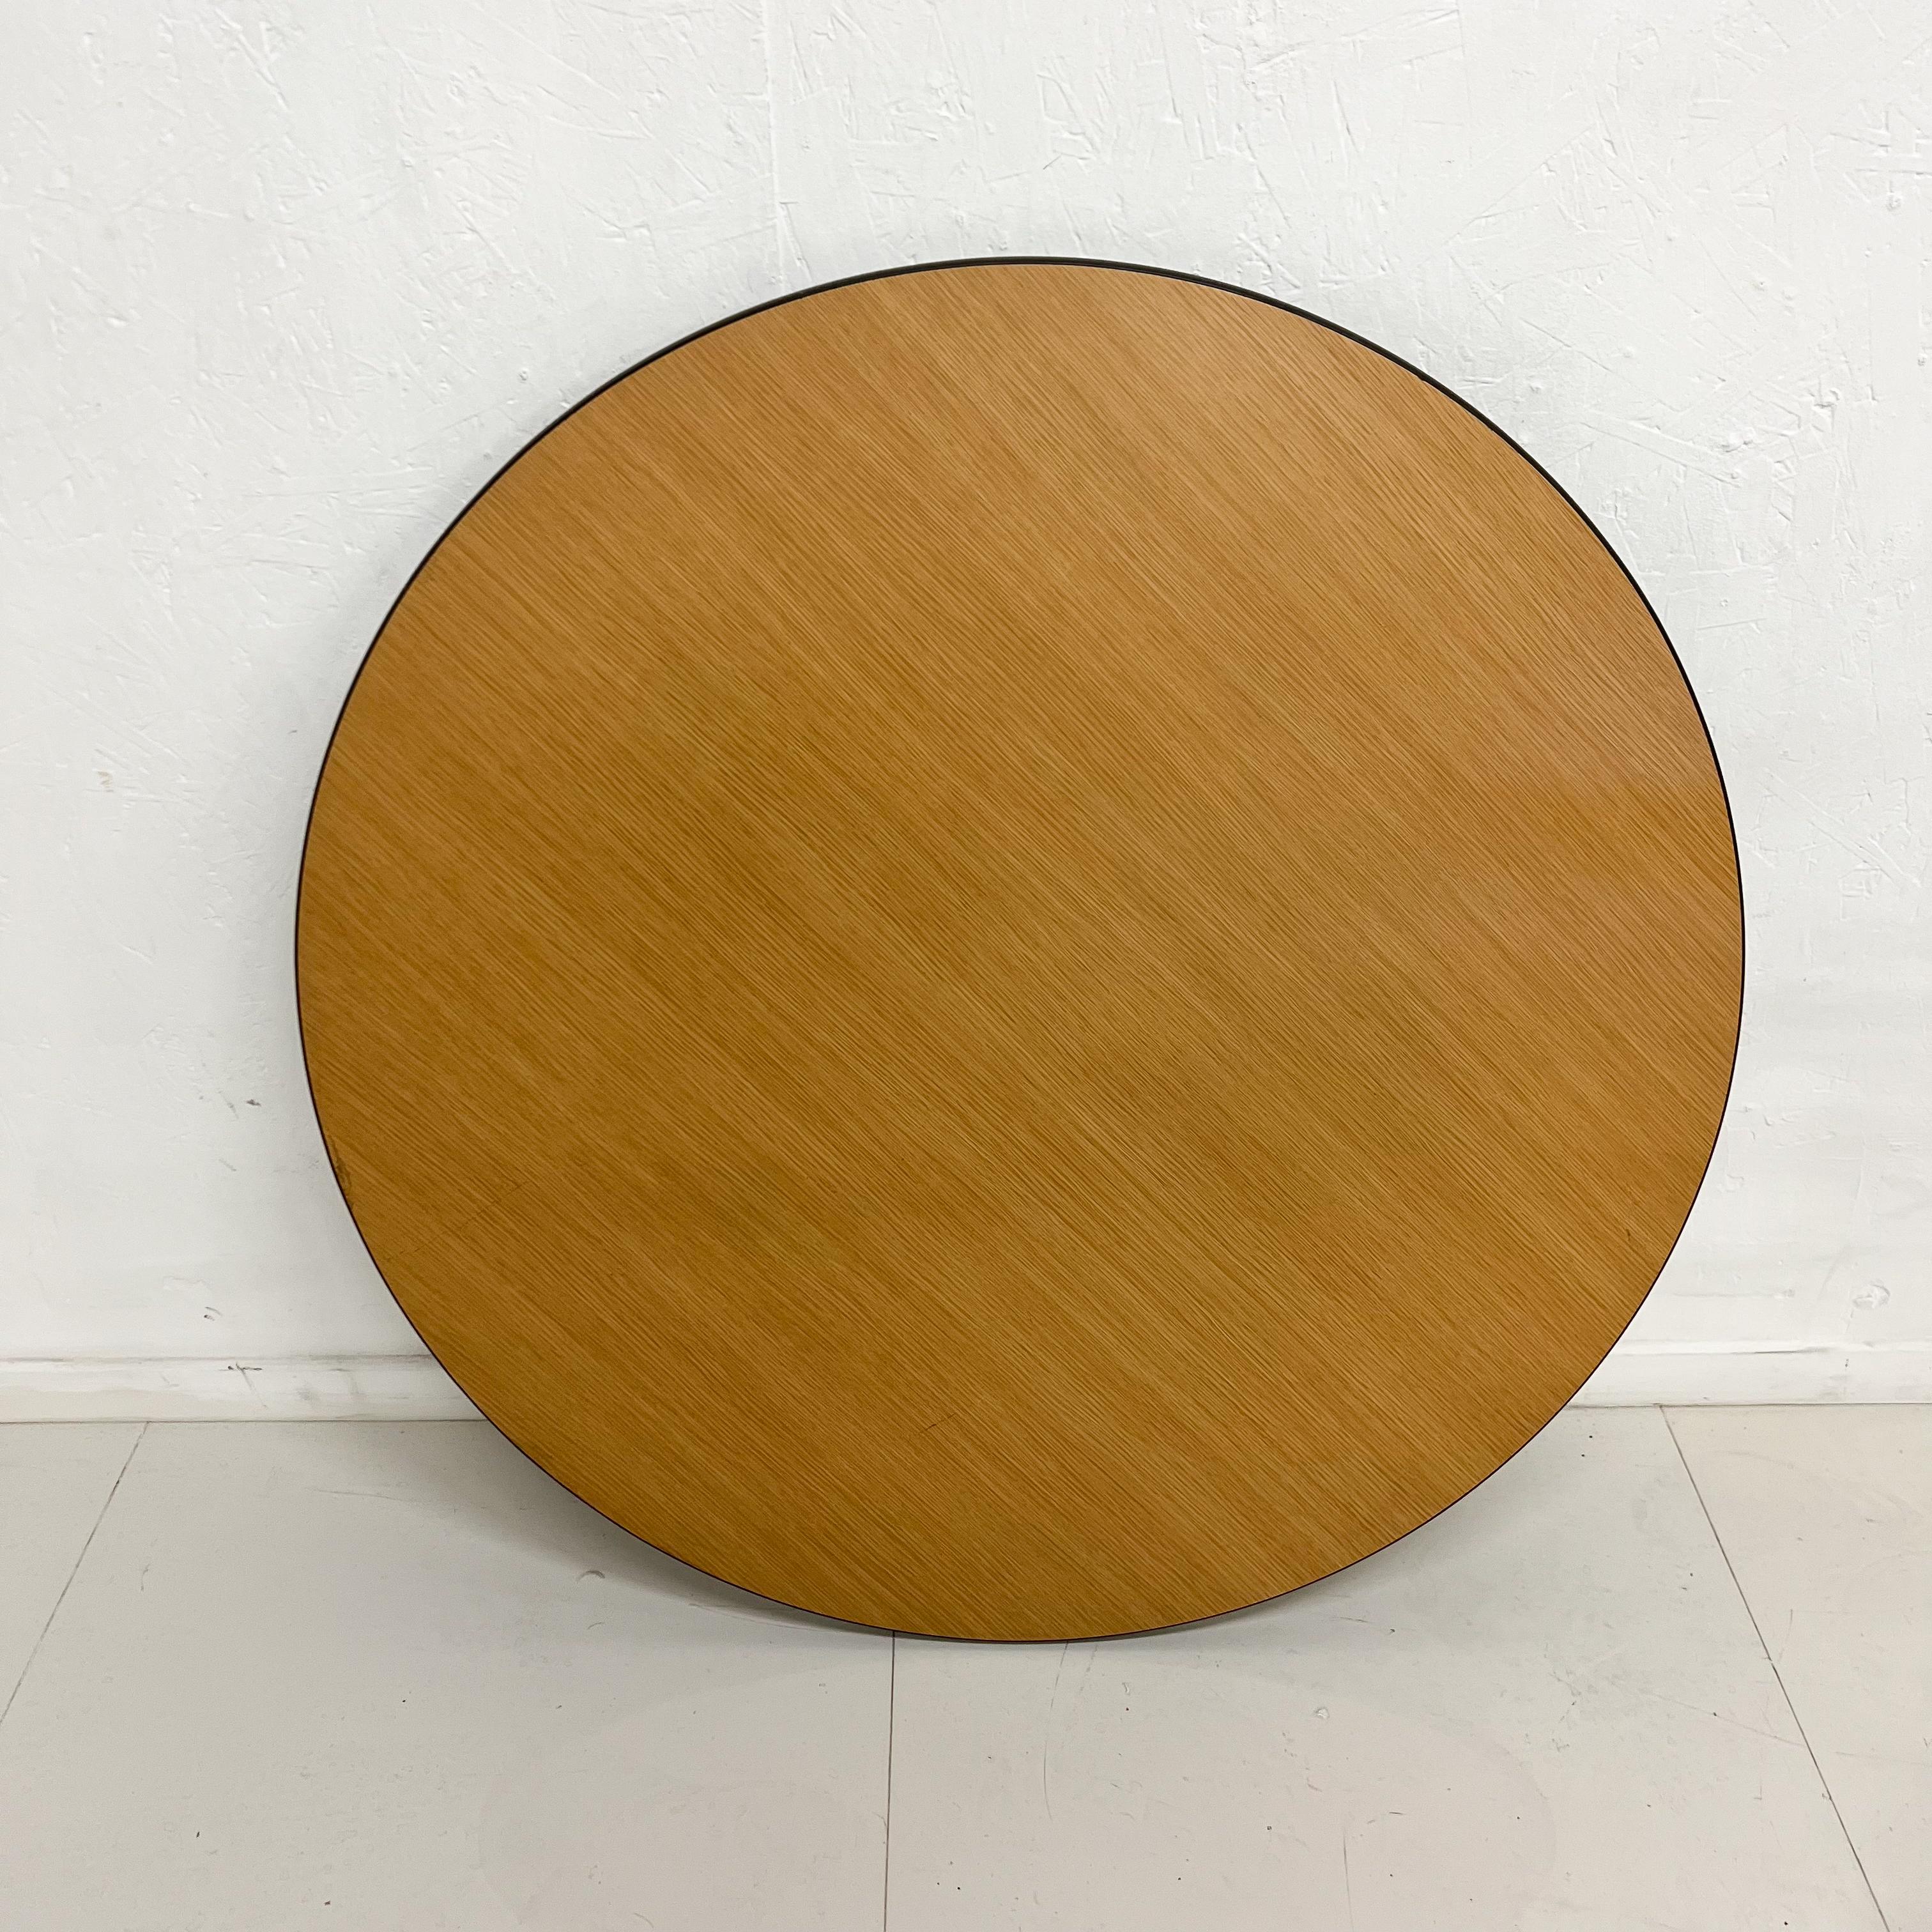 Vintage Modern round dining table by Herman Miller, Eames Aluminum Group HMA
Maker label present
Four-star base with round table-top wood grain laminate
Measures: 27.5 Tall x 35.5 diameter
Preowned original vintage condition.
See images provided.
LA